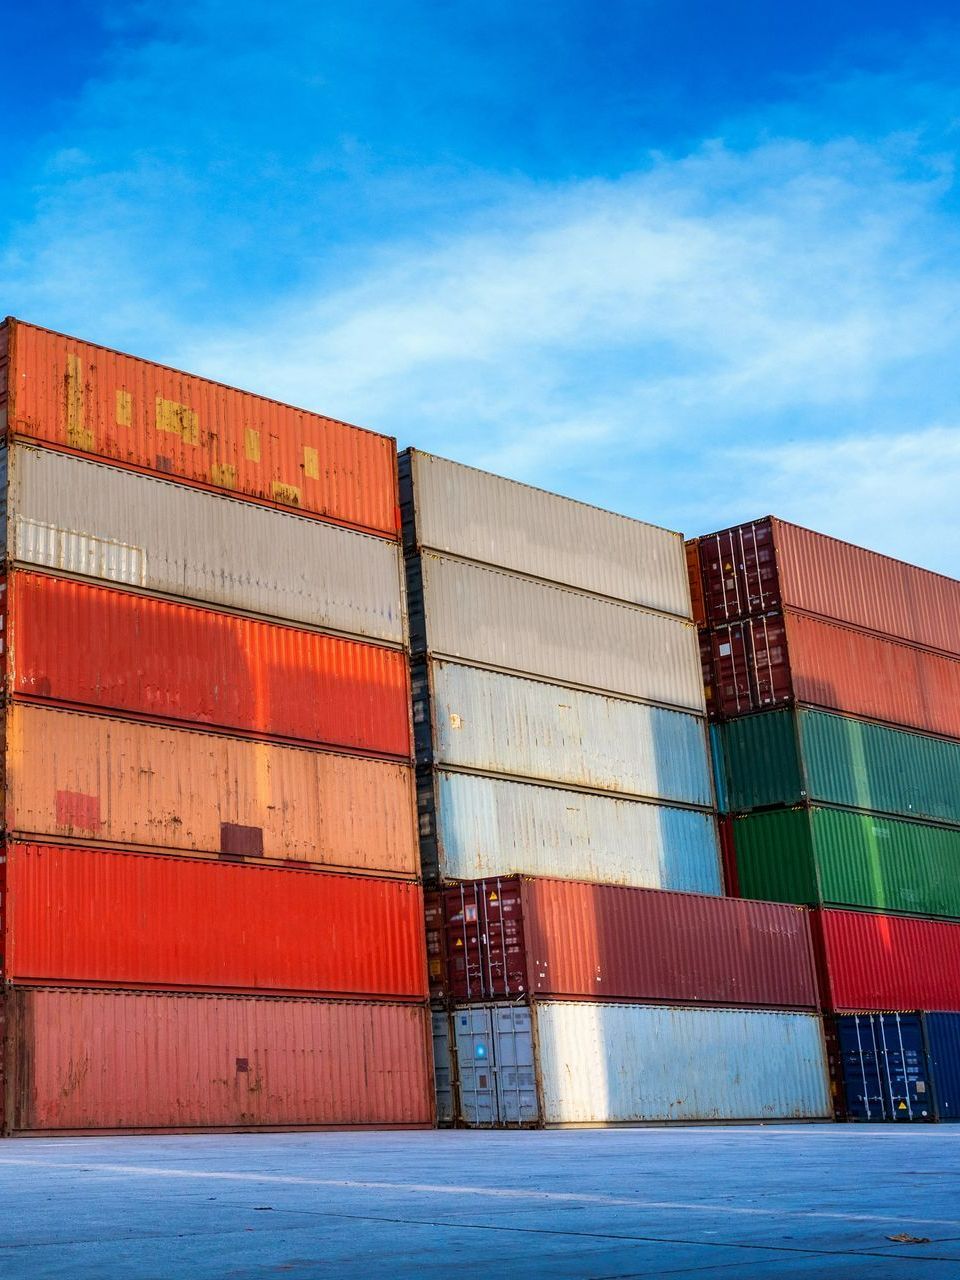 Shipping Containers Stack with Sky in the Background